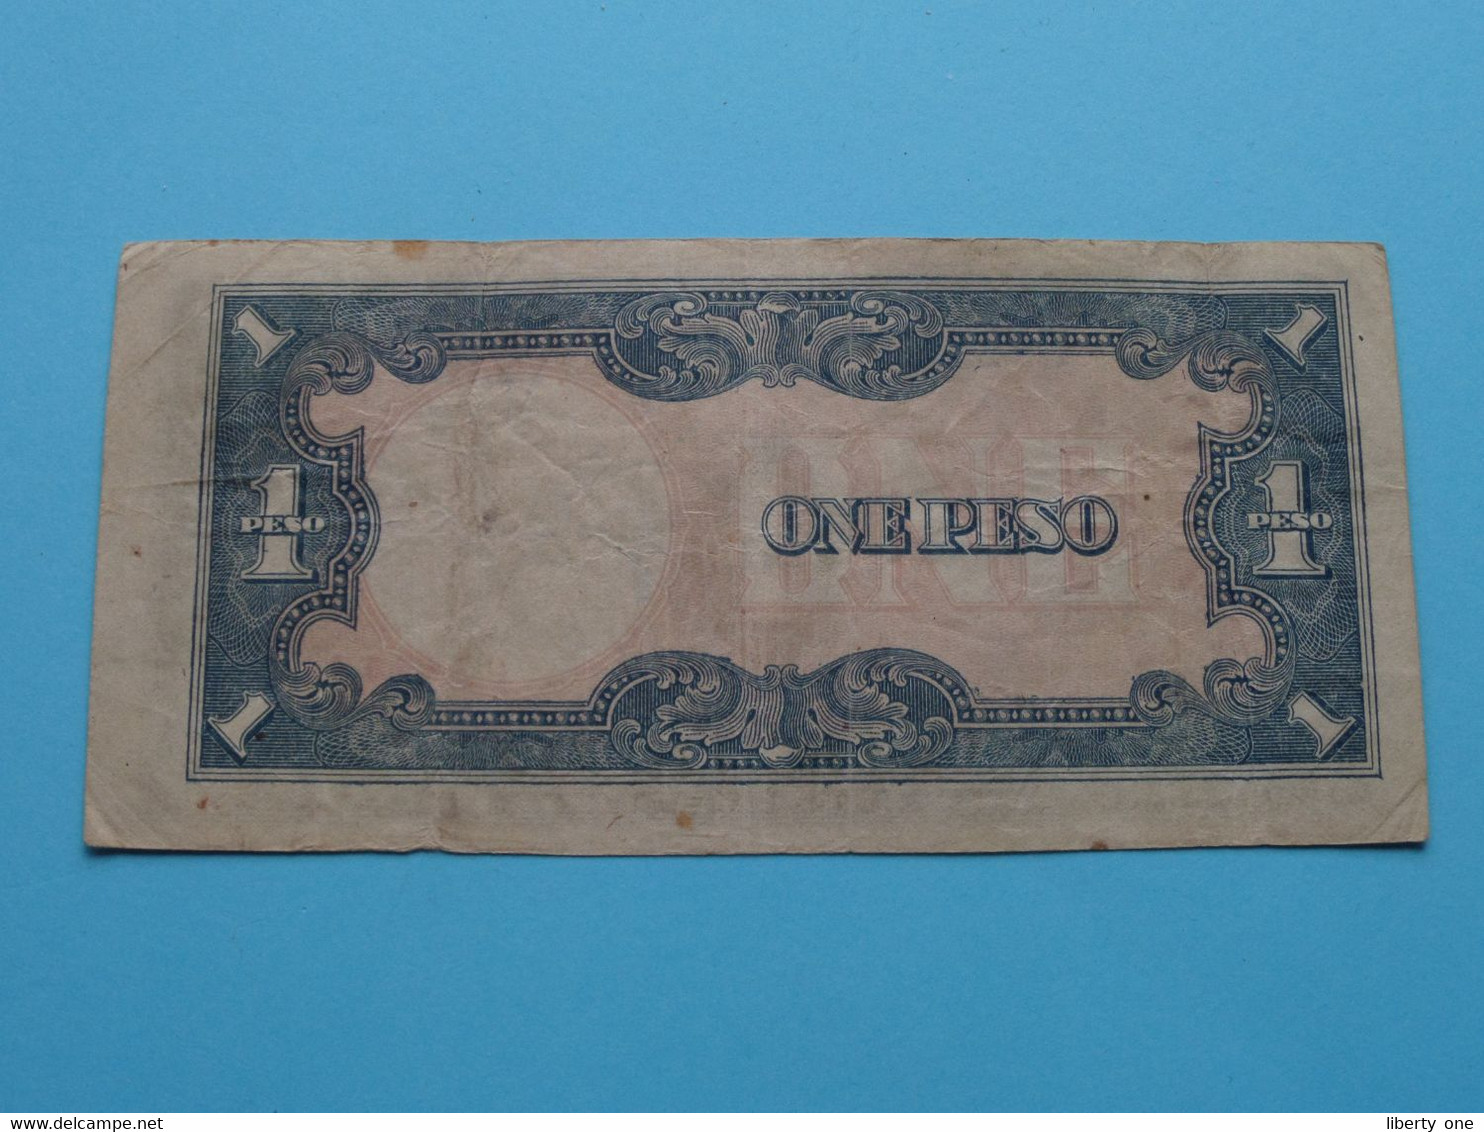 1 One Peso ( 64 - 0739434 ) The Japanese Government ( For Grade See SCAN ) Occupation / G ! - Filippine